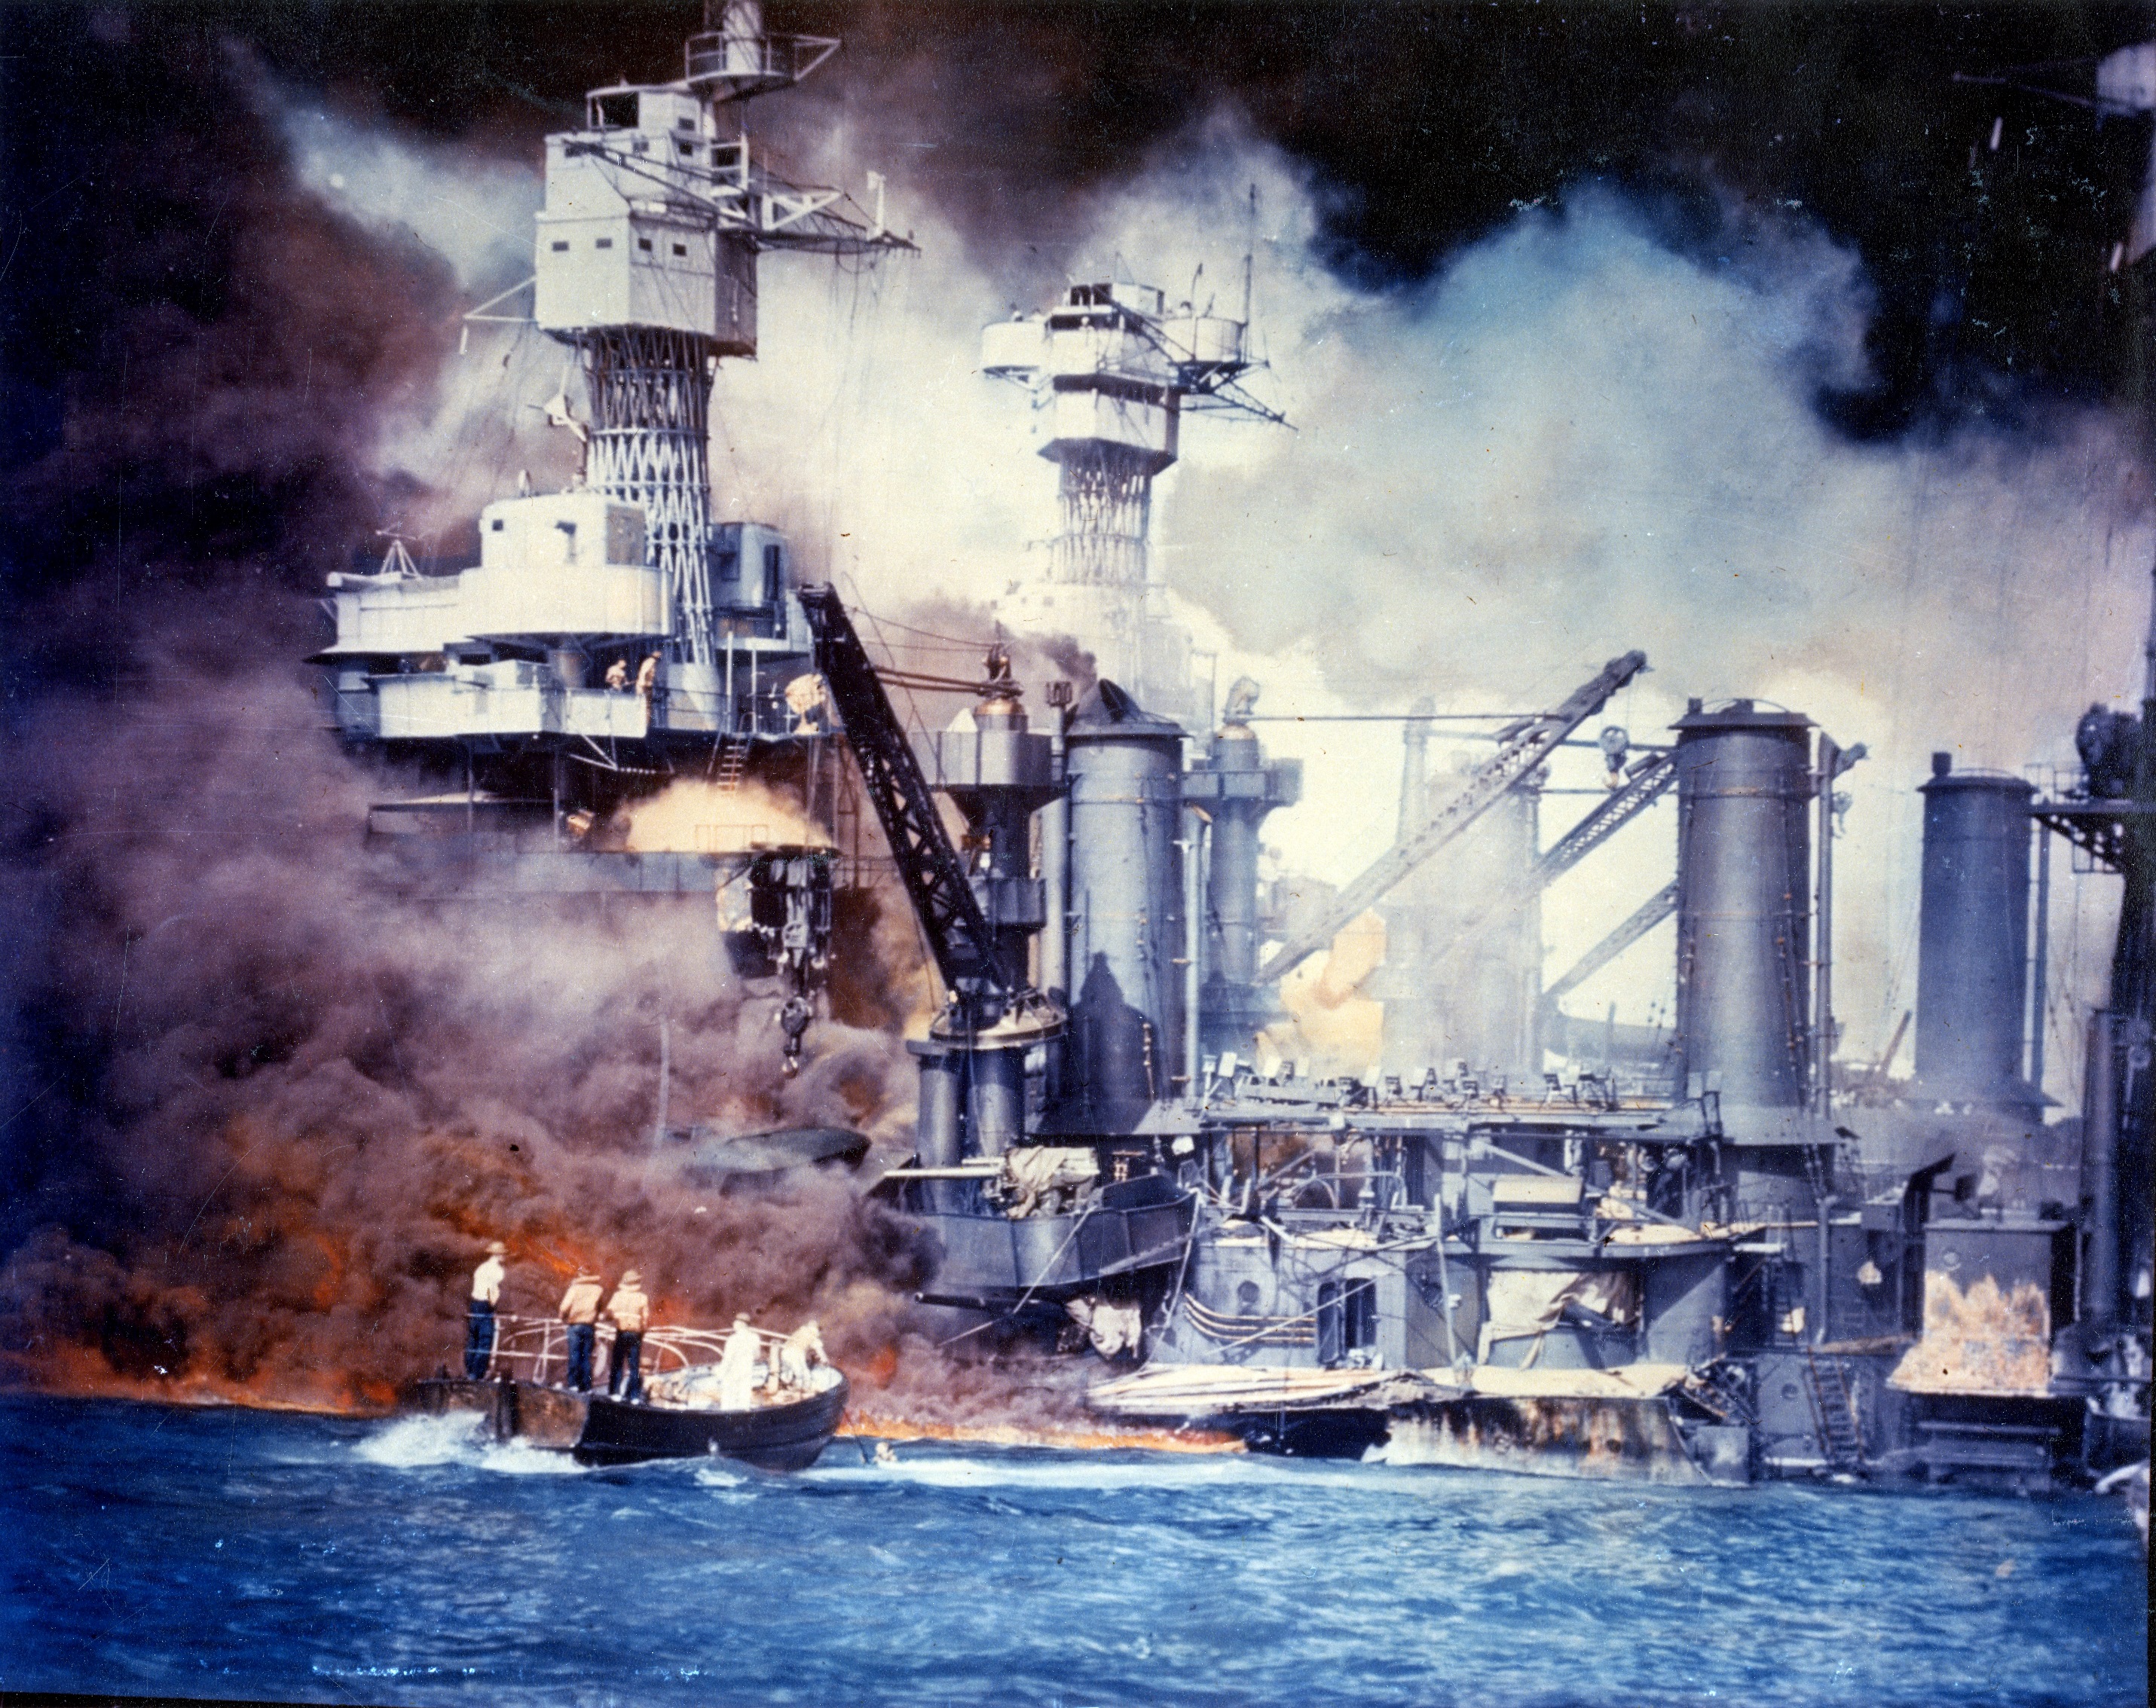 Sailors in a motor launch rescued a survivor from the water alongside the sunken West Virginia during or shortly after the Japanese air raid on Pearl Harbor, 7 Dec 1941, photo 2 of 2; note false color